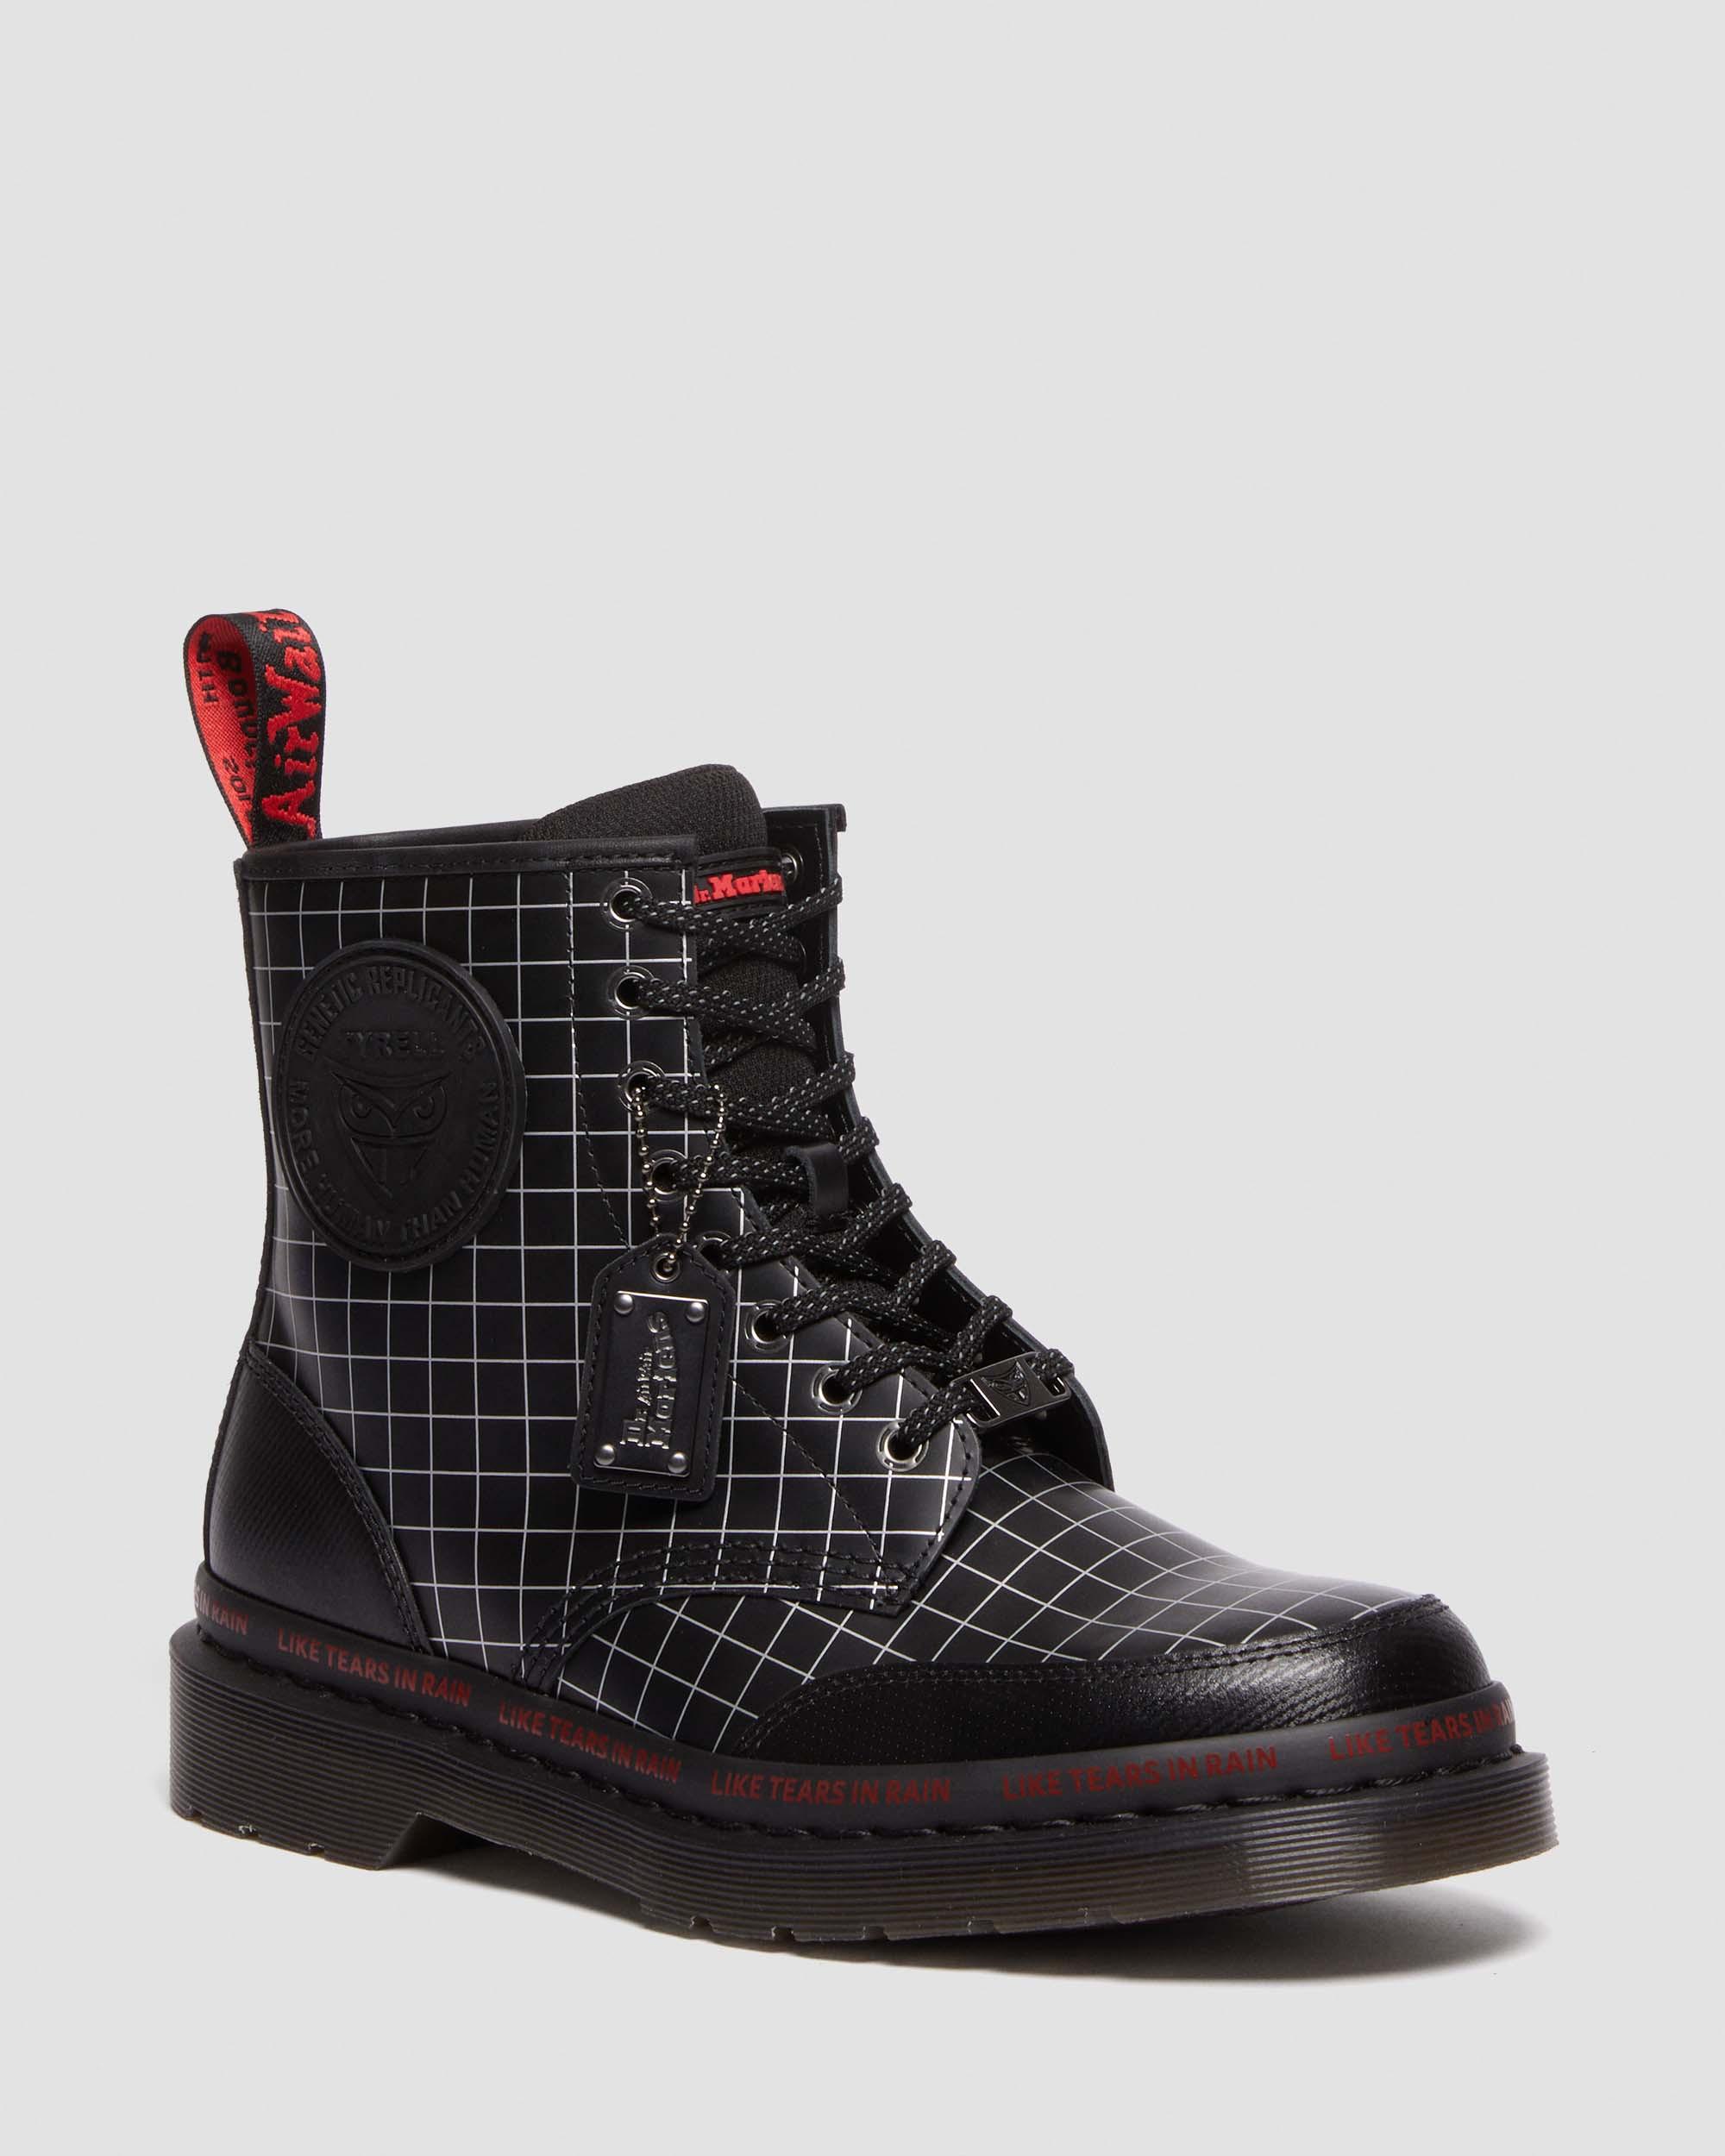 1460 Blade Runner Leather Boots in Black | Dr. Martens